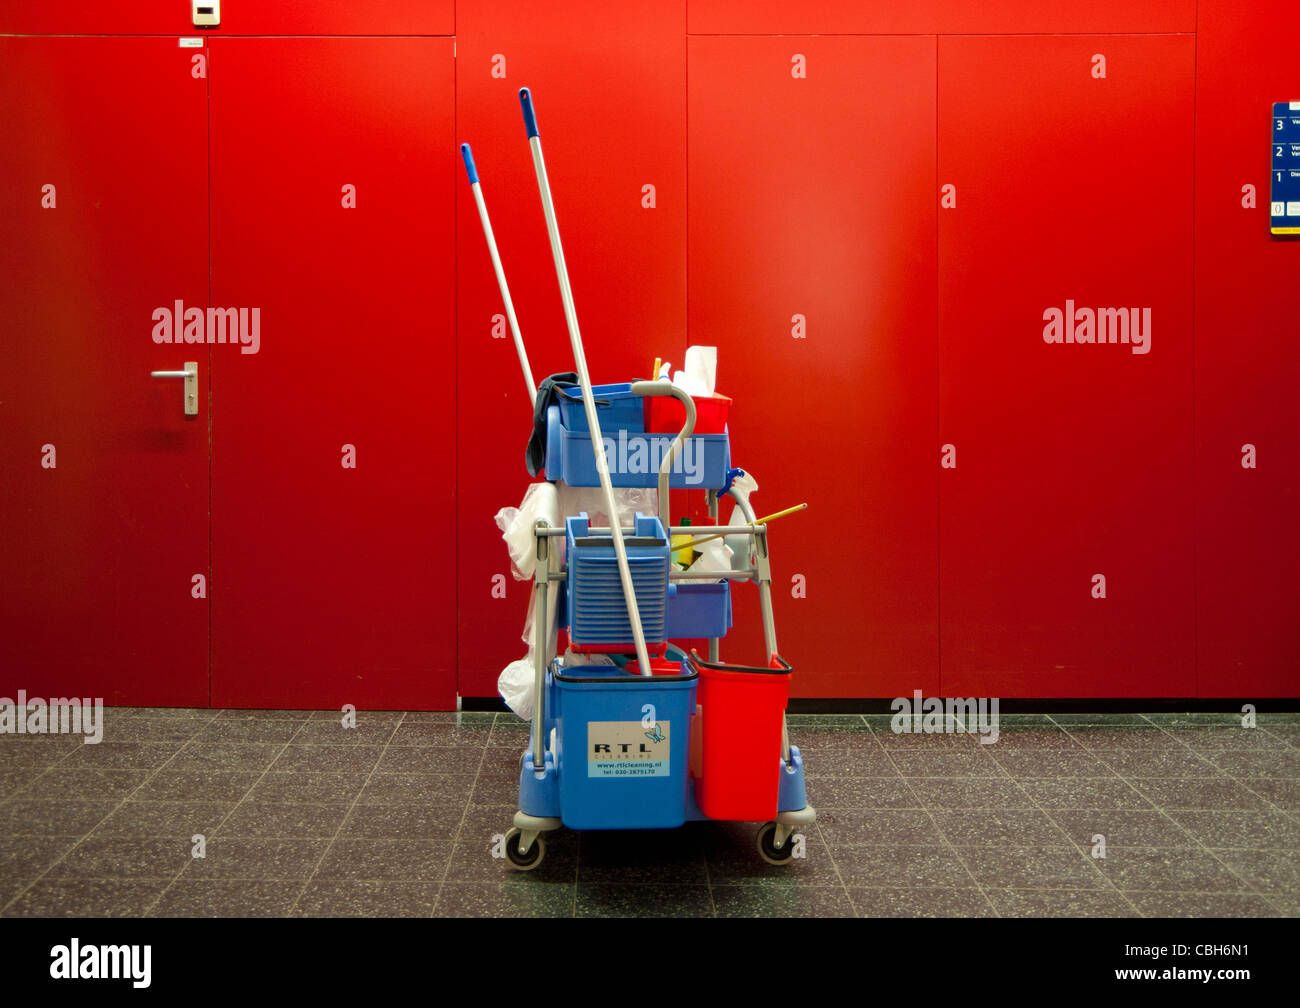 Composition with red wall and cleaning products, hall, tension, adventures Stock Photo